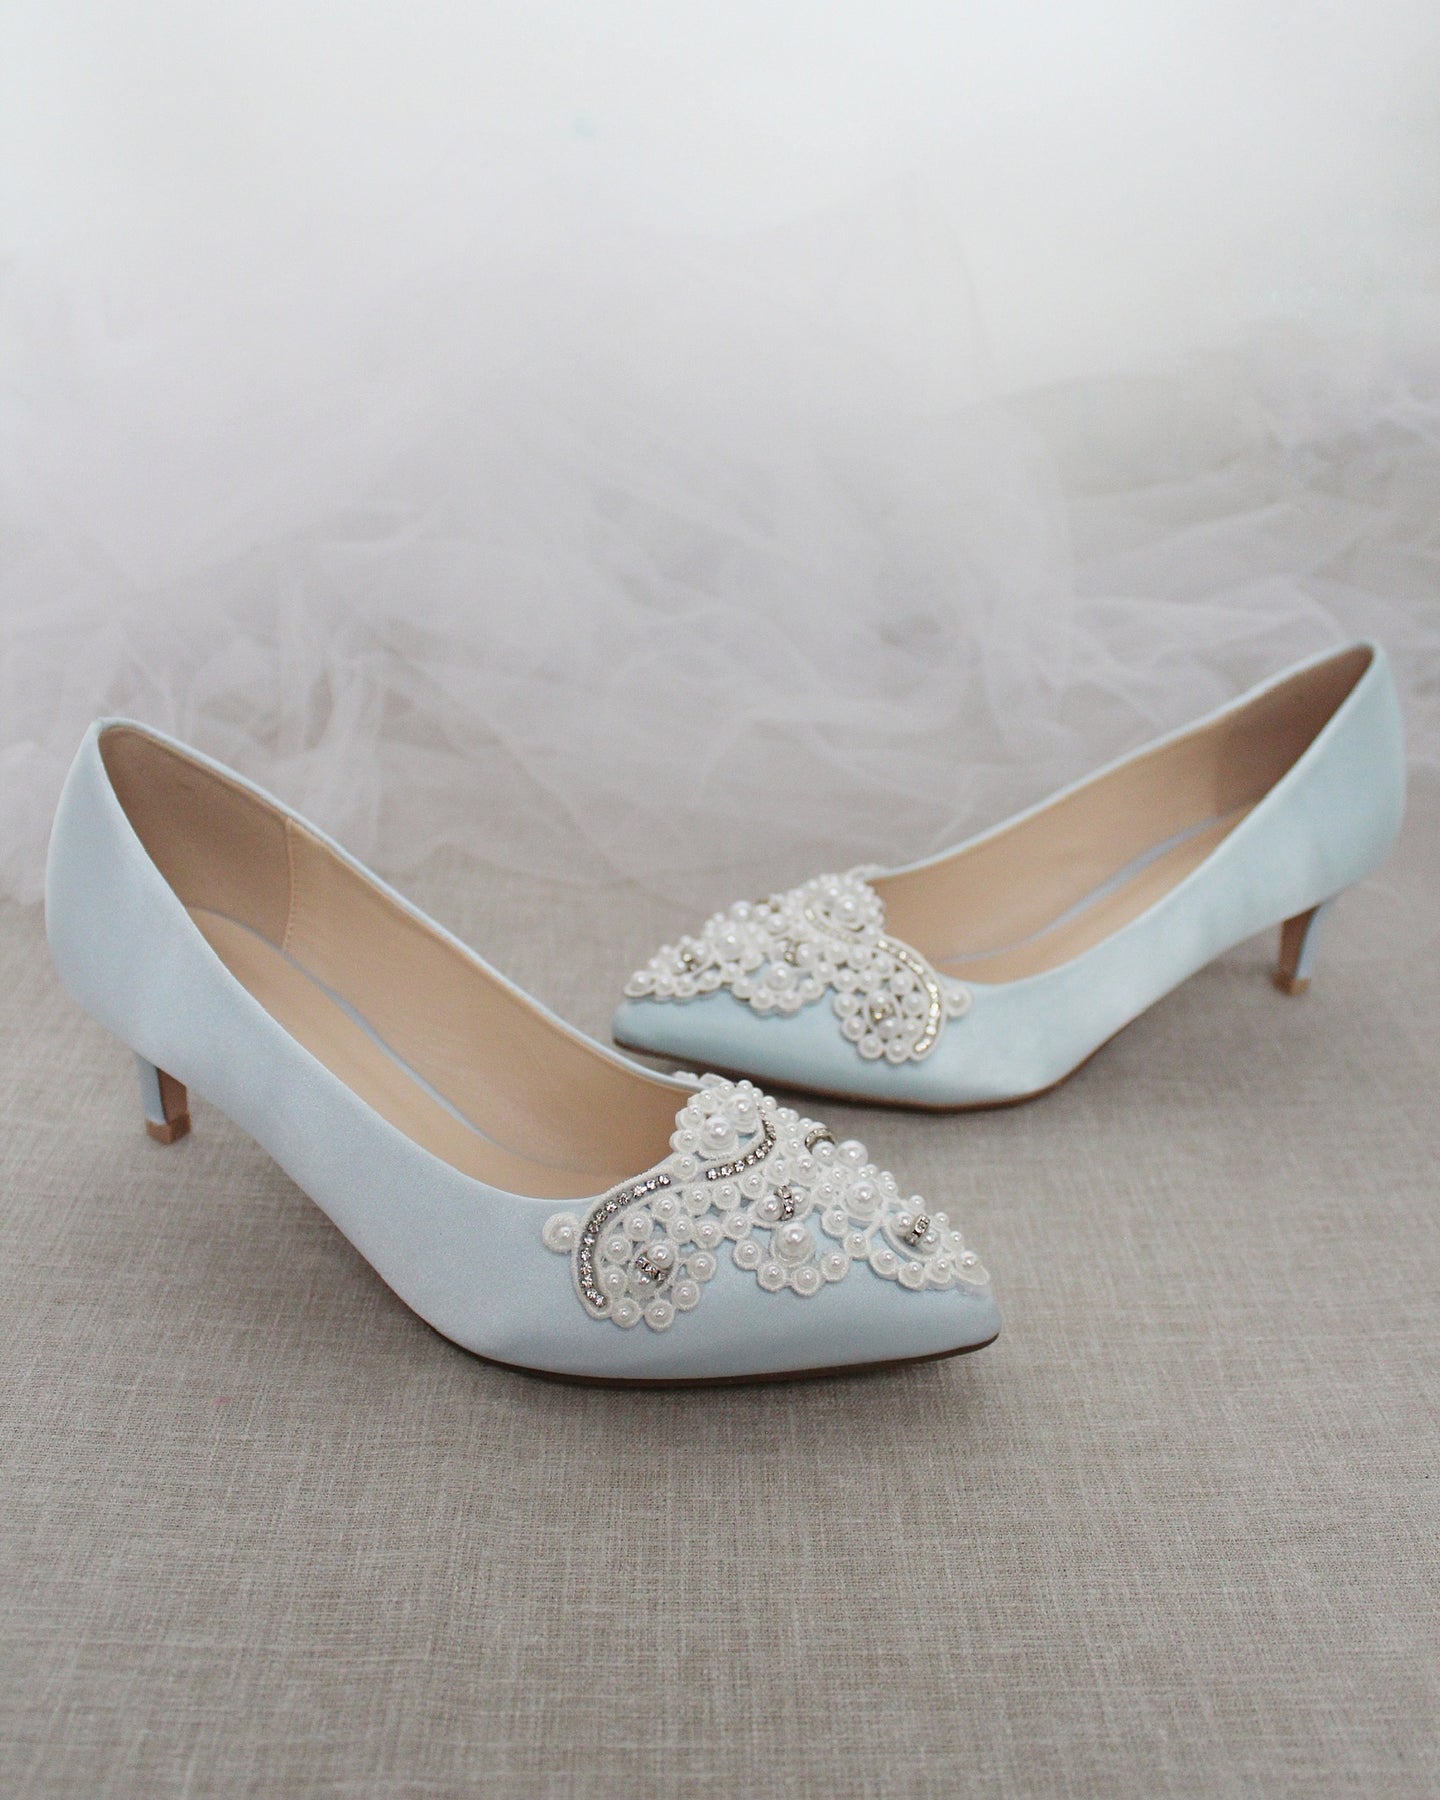 Light Blue Satin Pointy Toe Pump Low Heel with Oversized Pearls ...